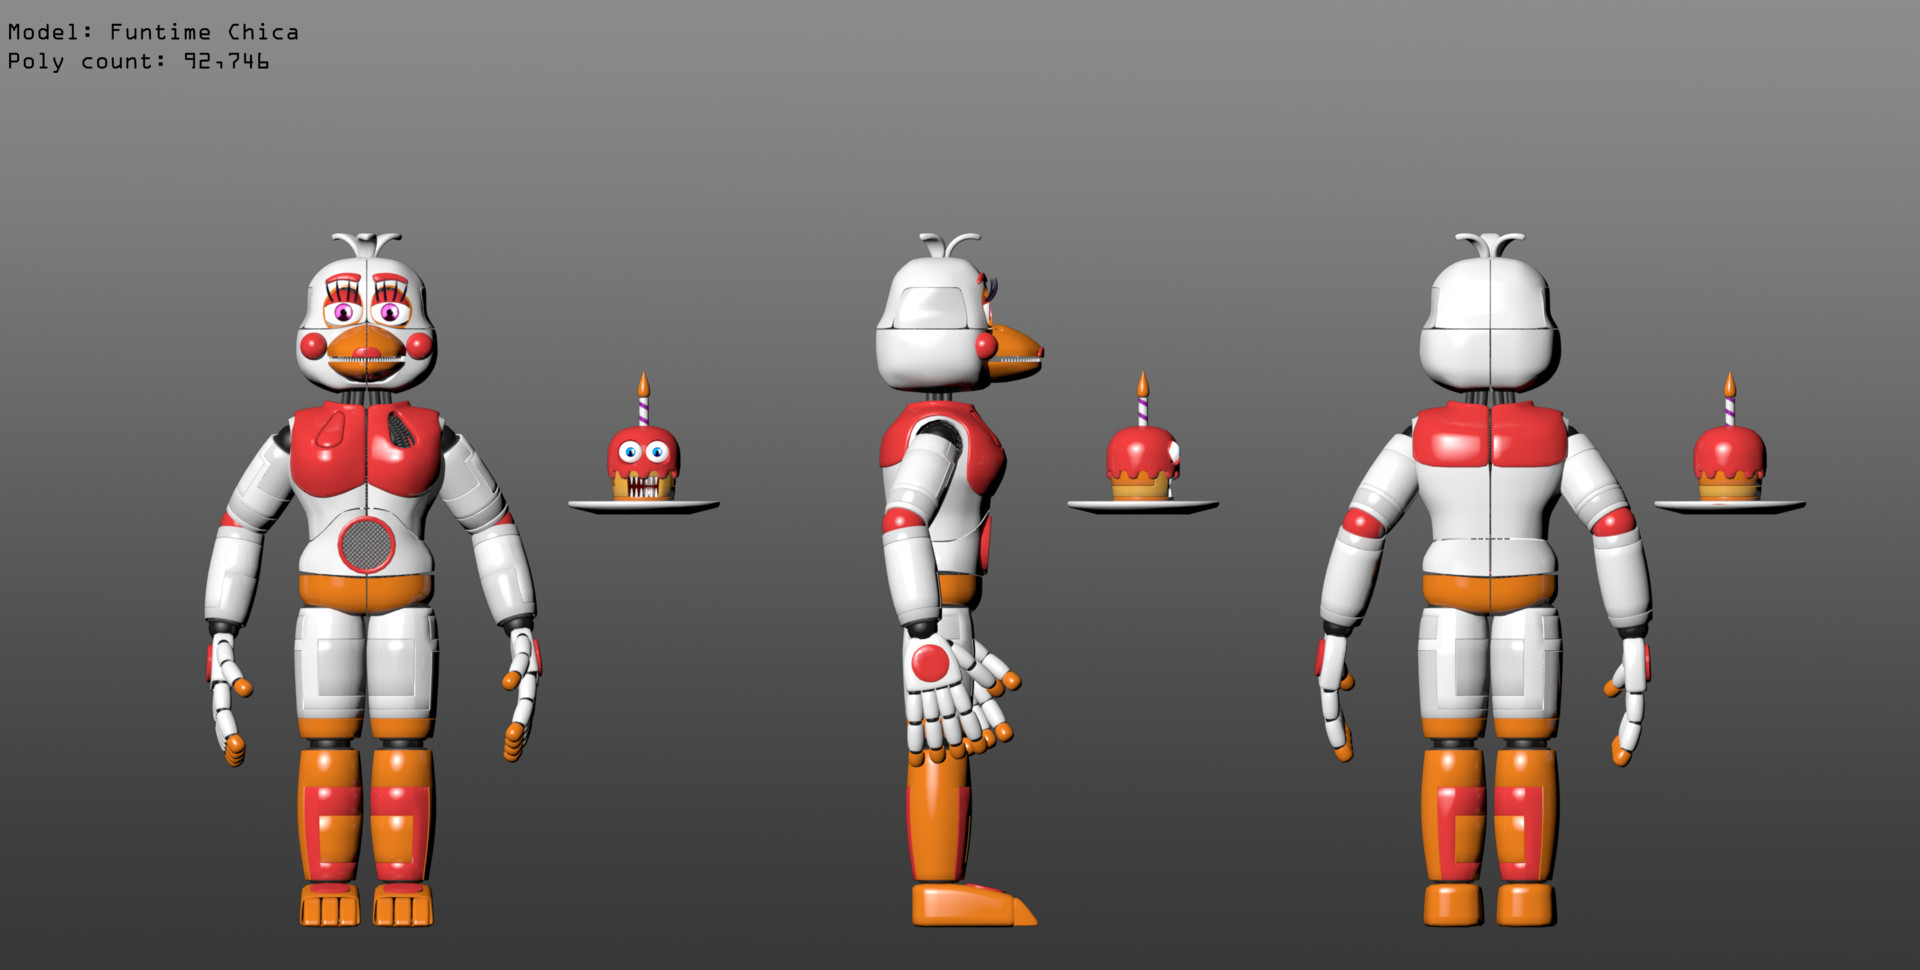 Making Funtime Chica from Five Nights at Freddy's 6 Pizzeria